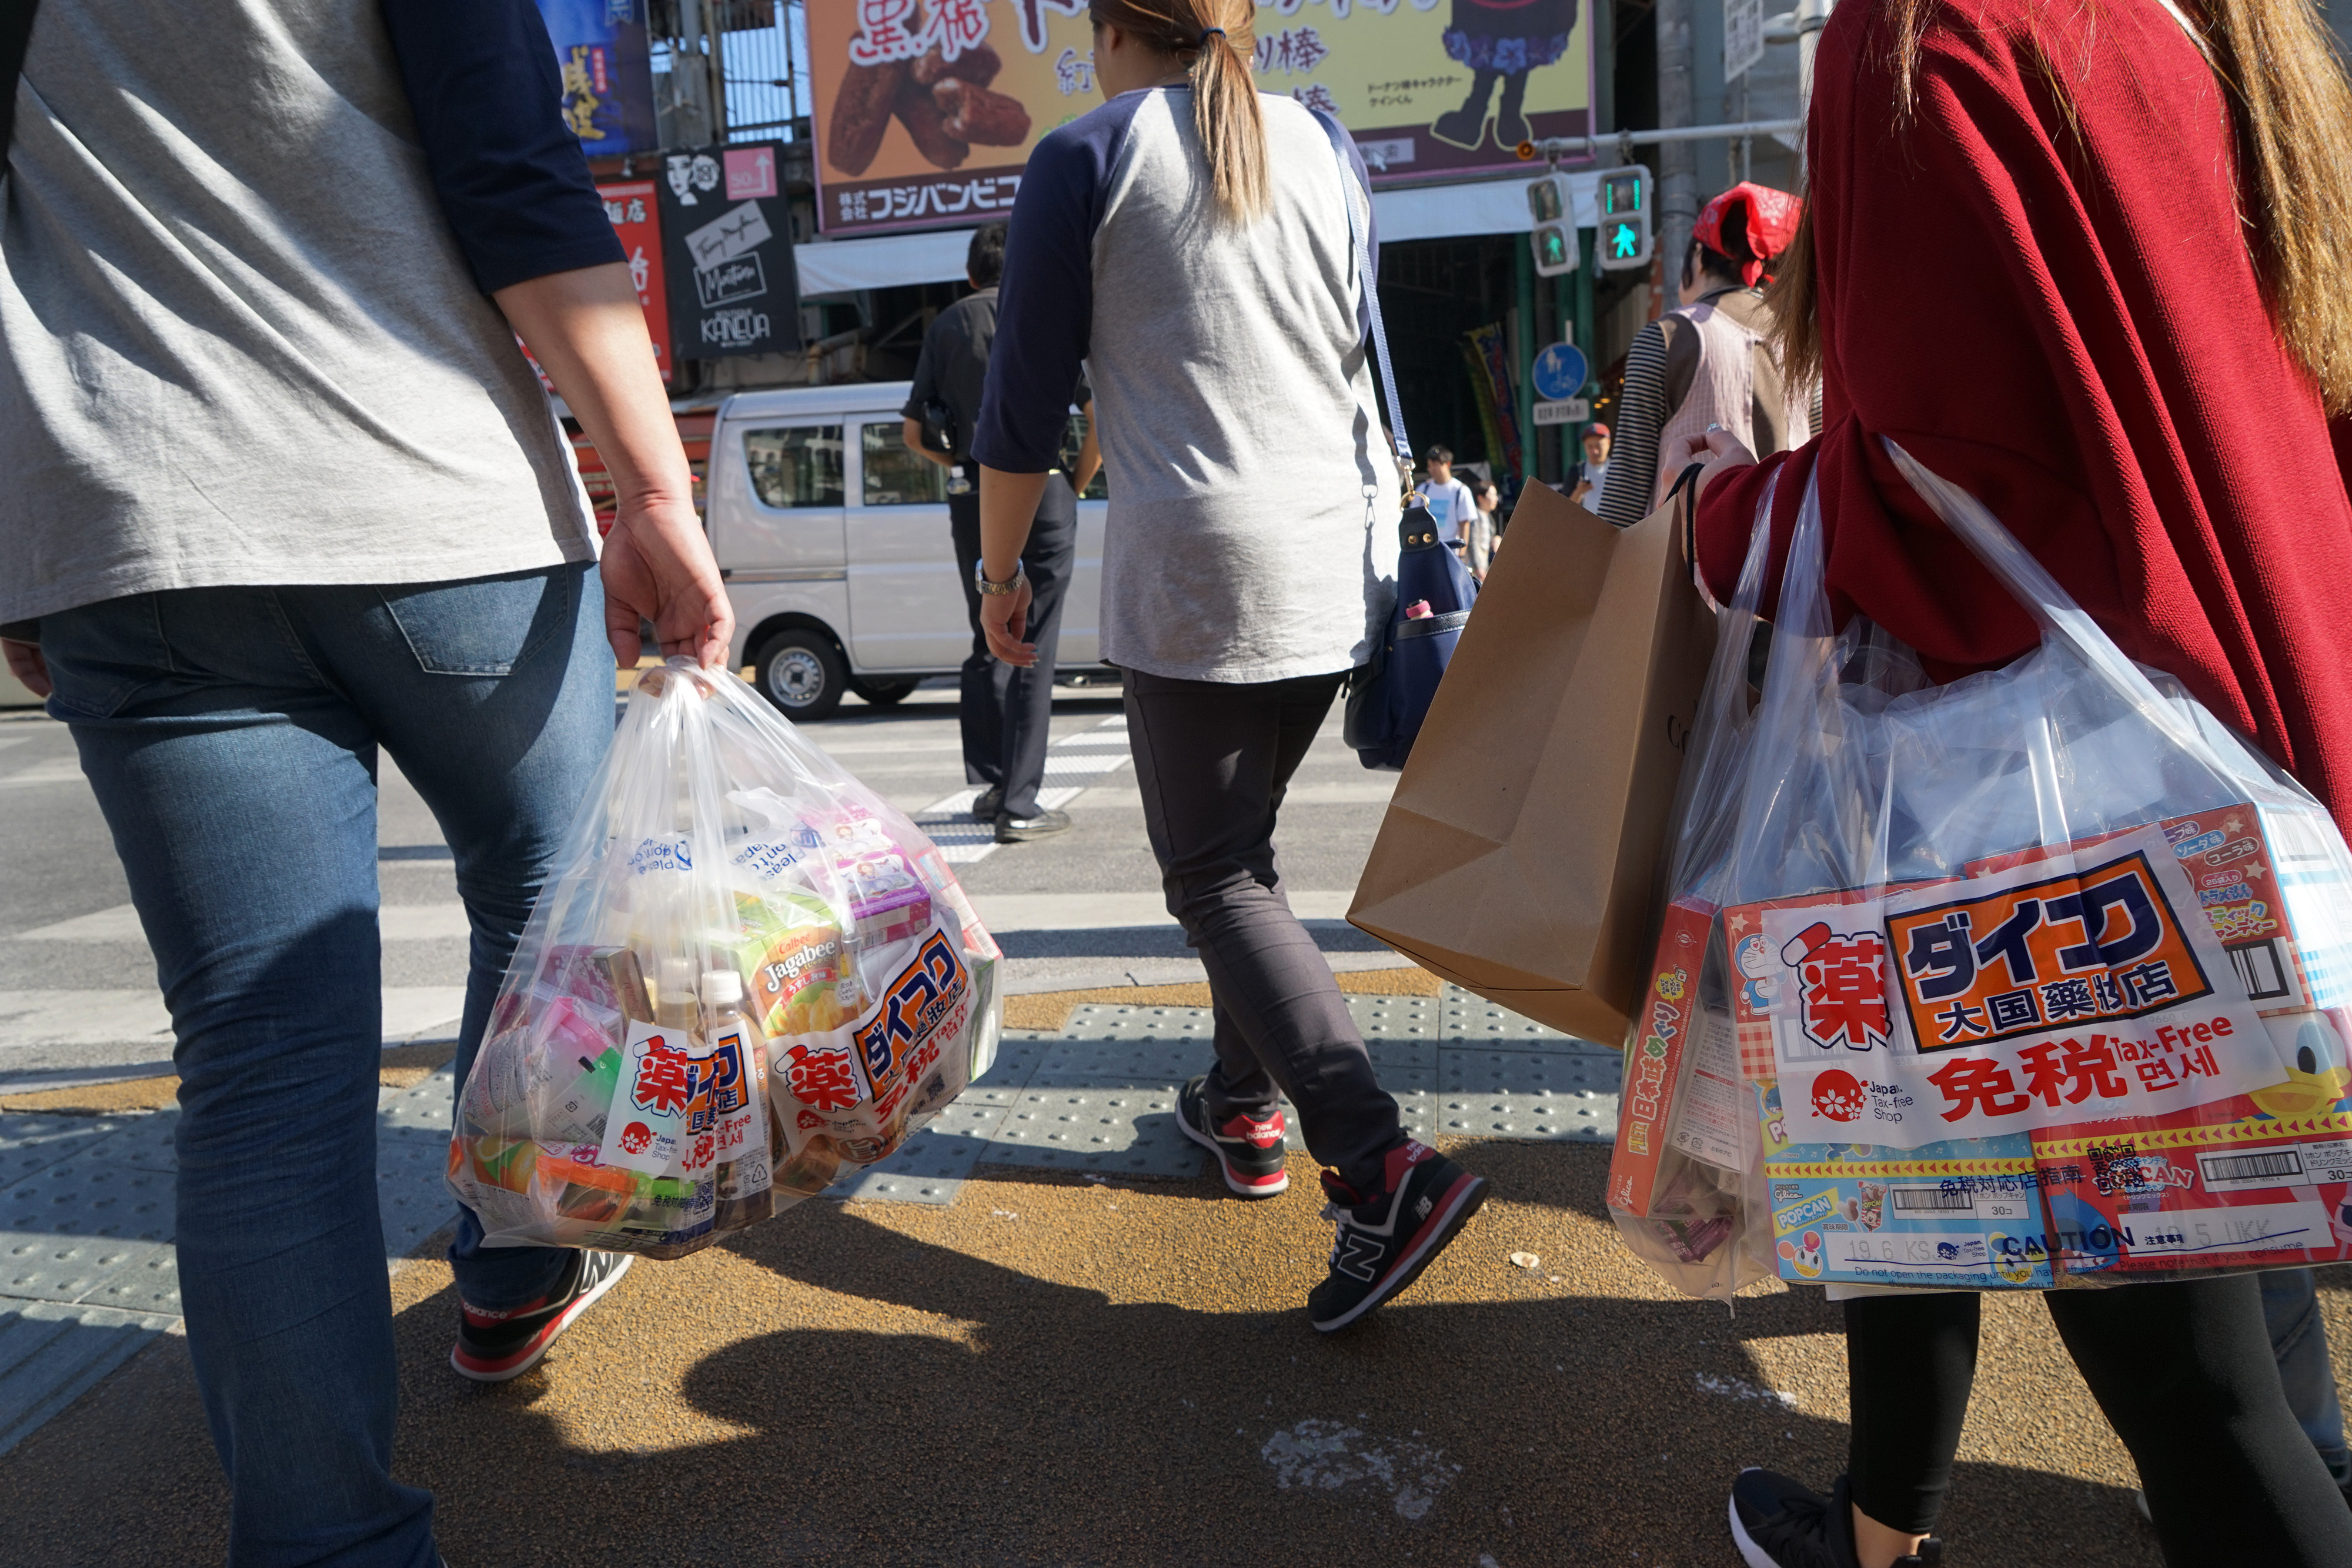 Tourists carry shopping bags in Naha, Okinawa. | BLOOMBERG